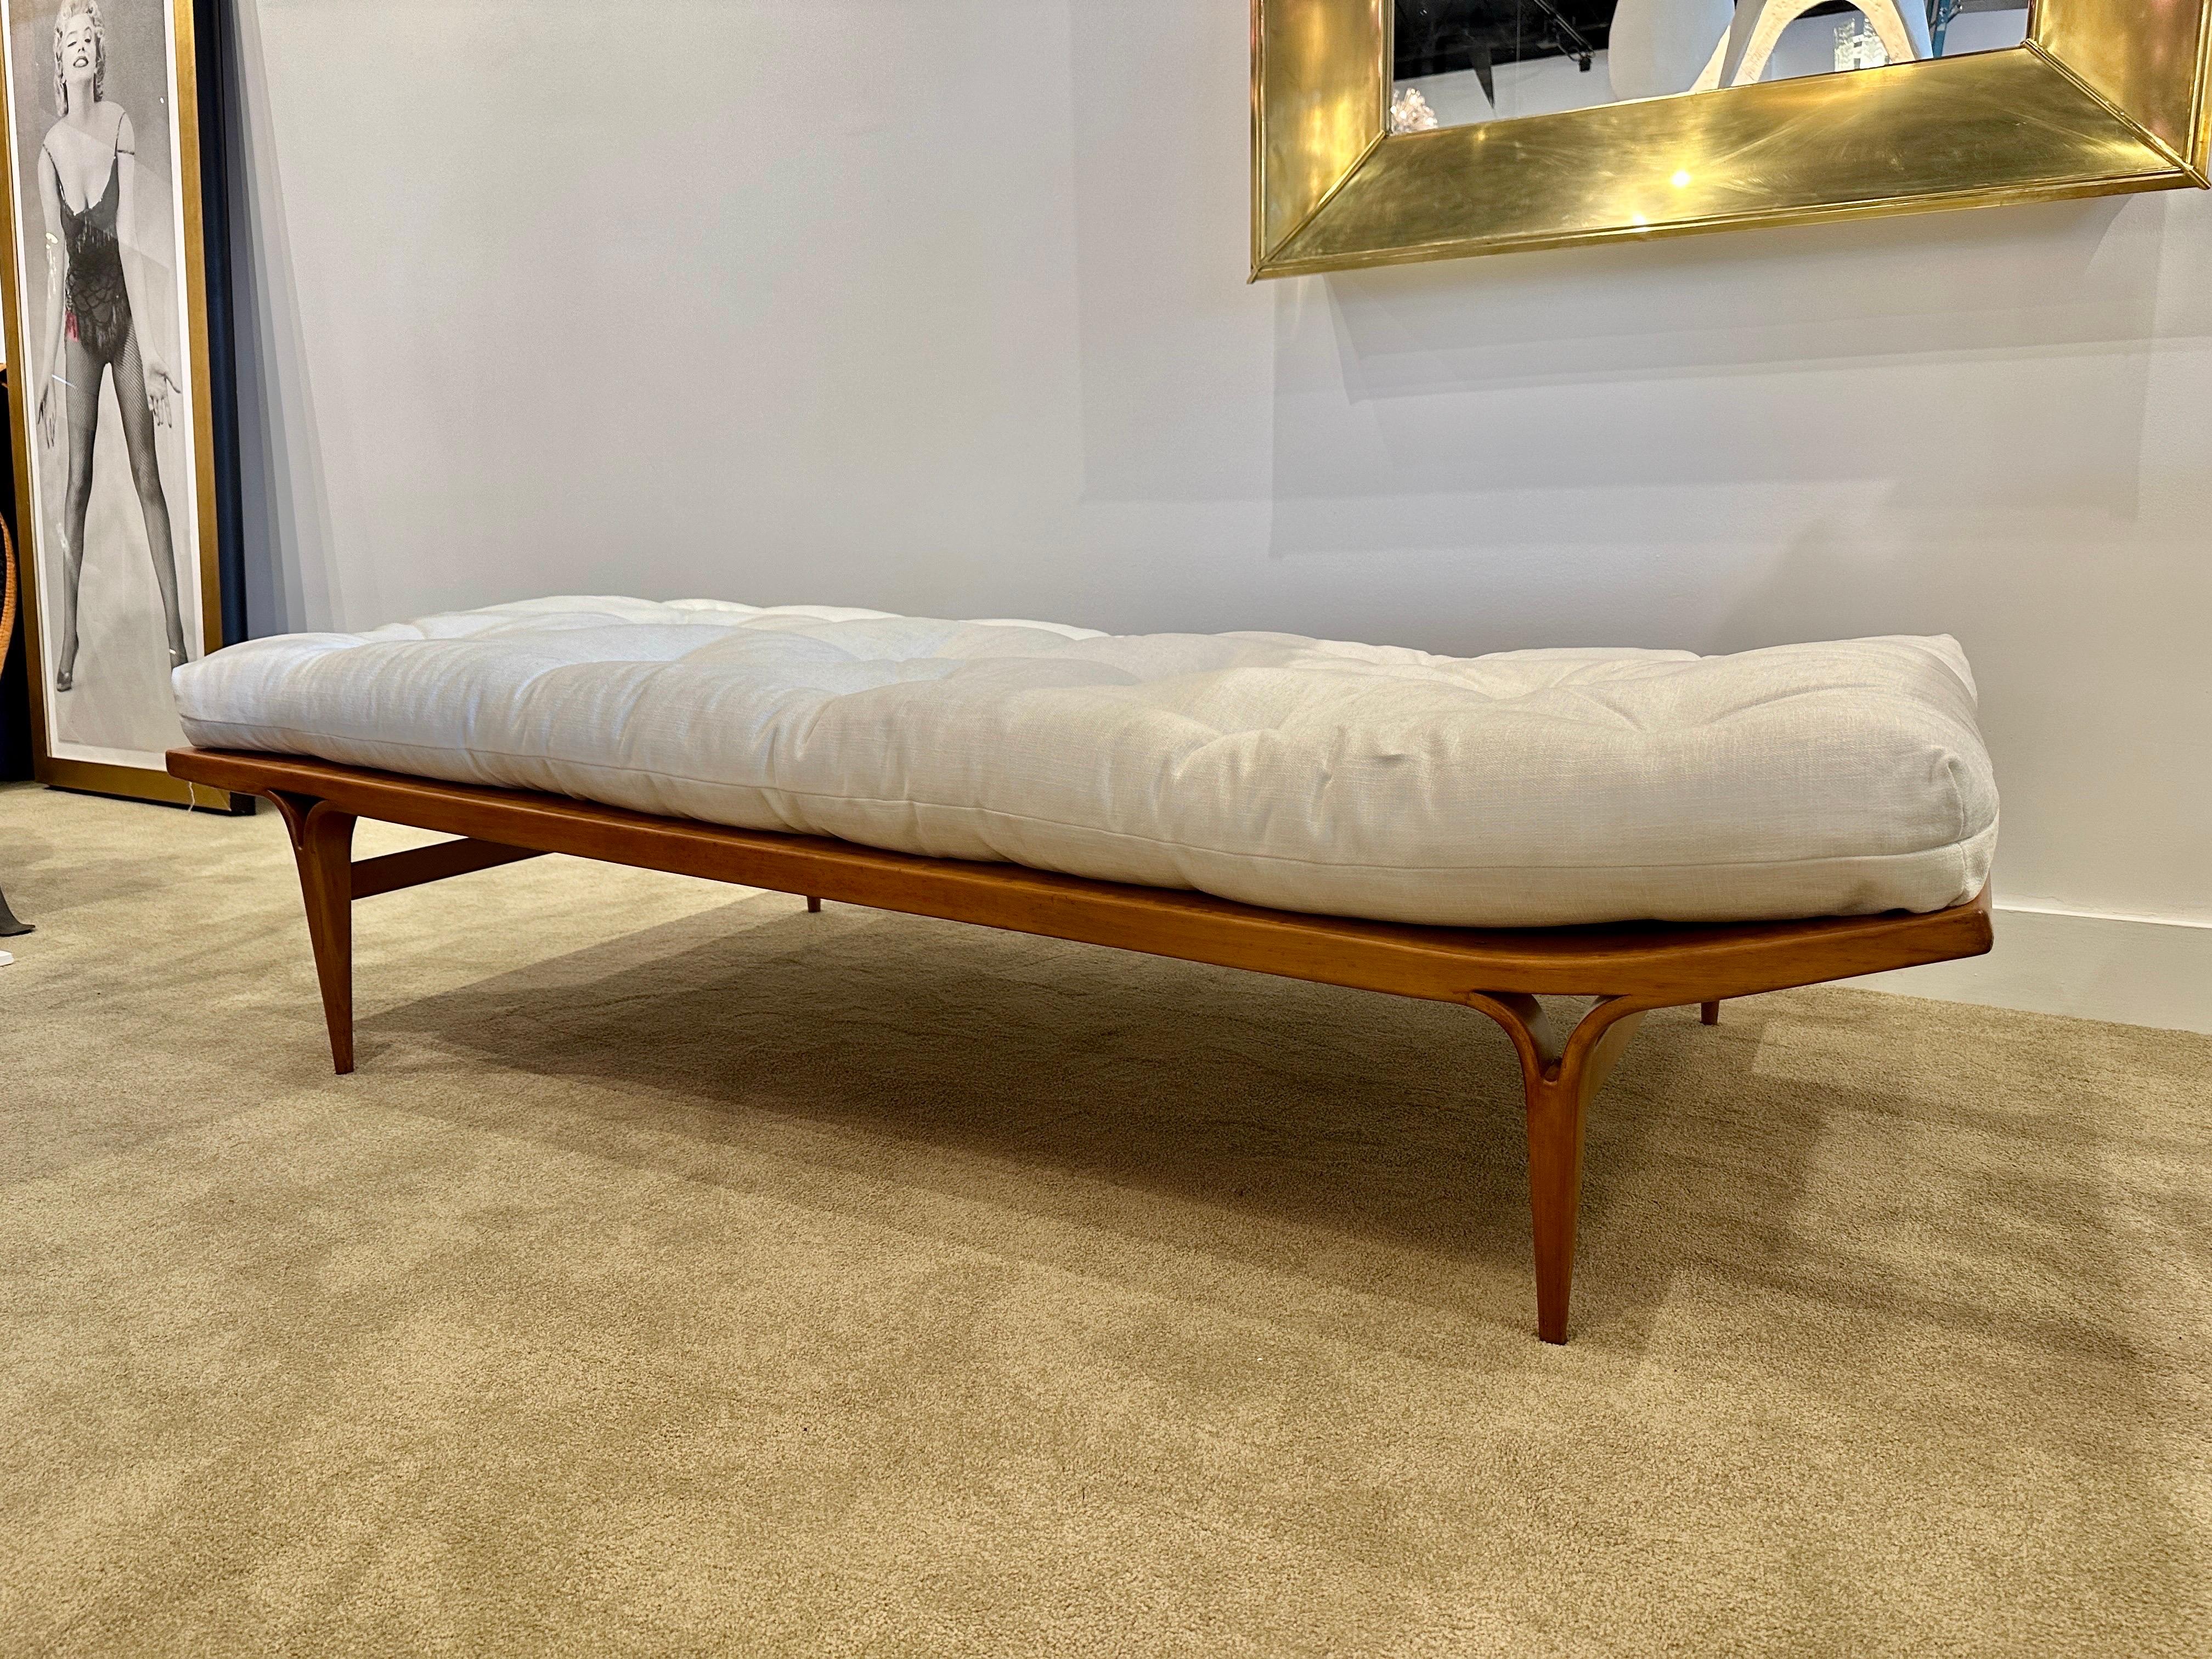 A totally original piece from Bruno Mathsson for Firma Karl Mathsson, with a newly upholstered cushion in a cotton/linen thick weave natural fabric (preserving the original design). This model was originally shown at the Berlin International